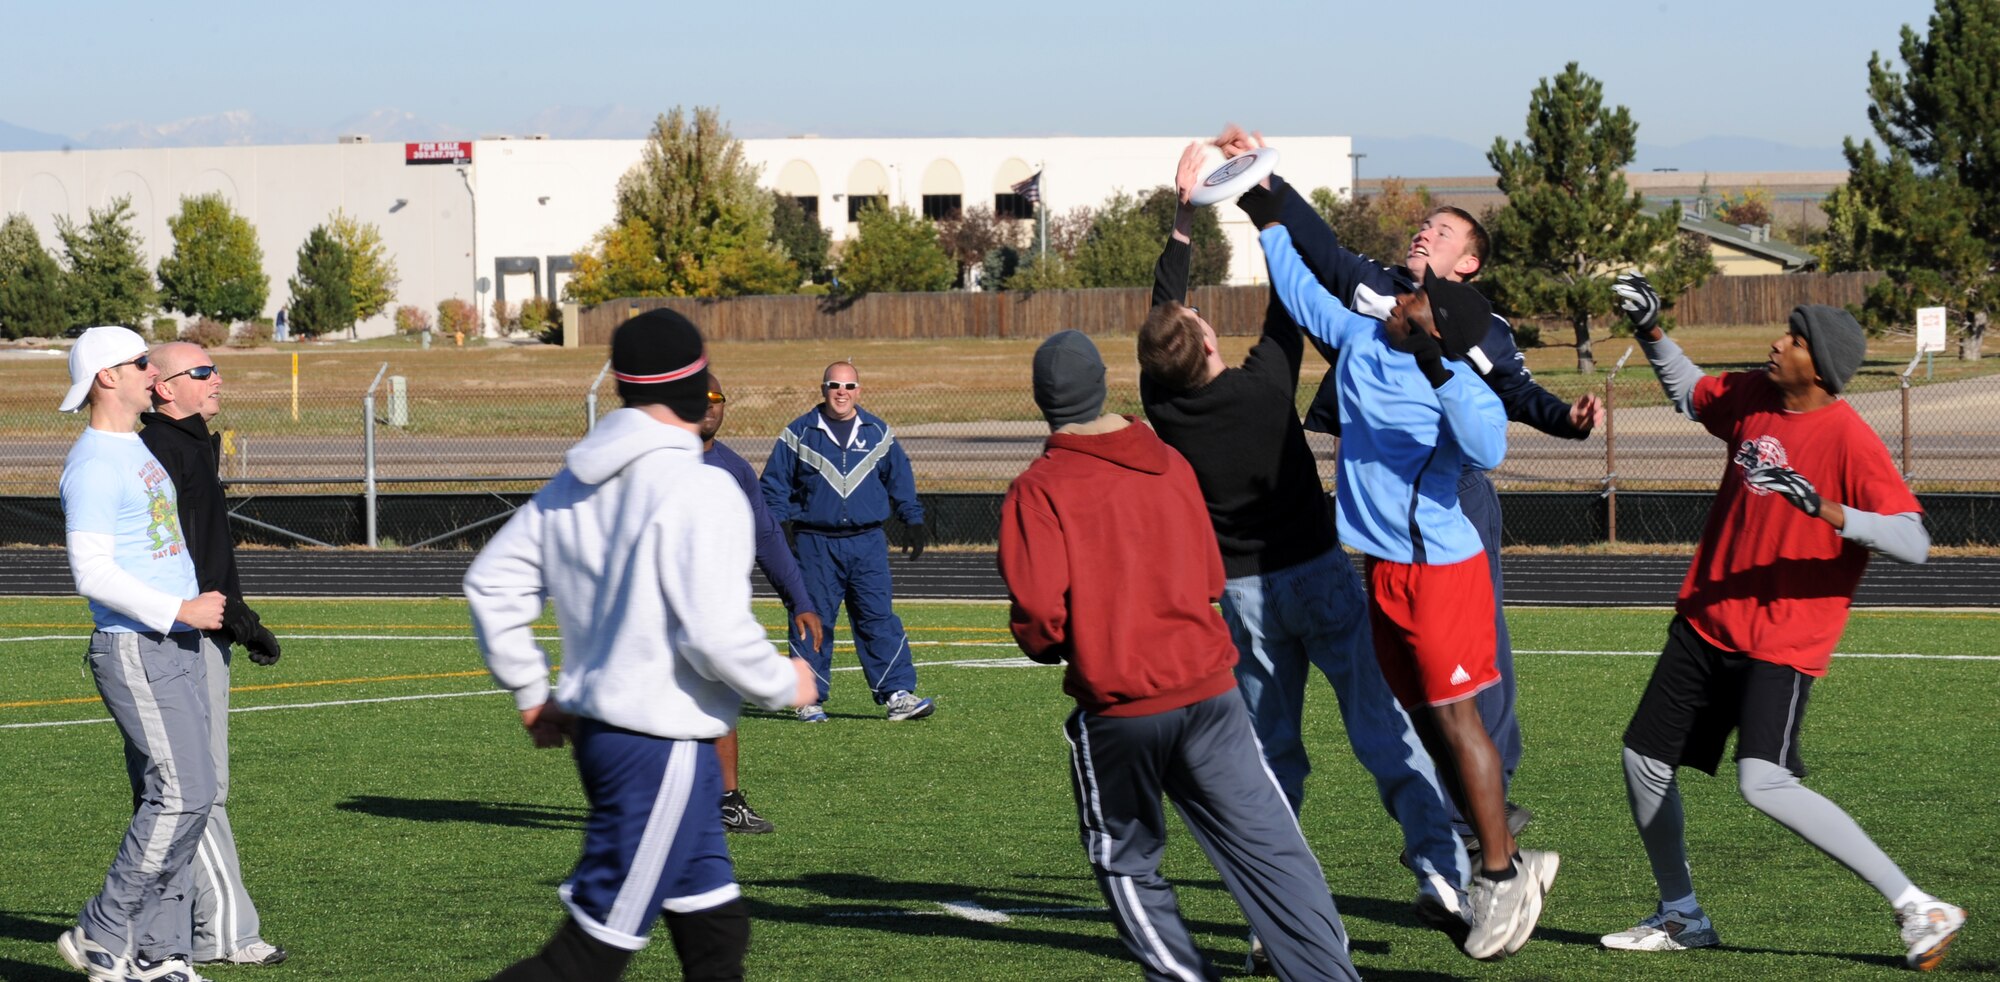 Buckley Air Force Base, Colo. – Team Buckley members play ultimate frisbee on the all purpose field during Sports and Field Day Oct. 2. (U. S. Air Force photo by Senior Airman John Easterling)